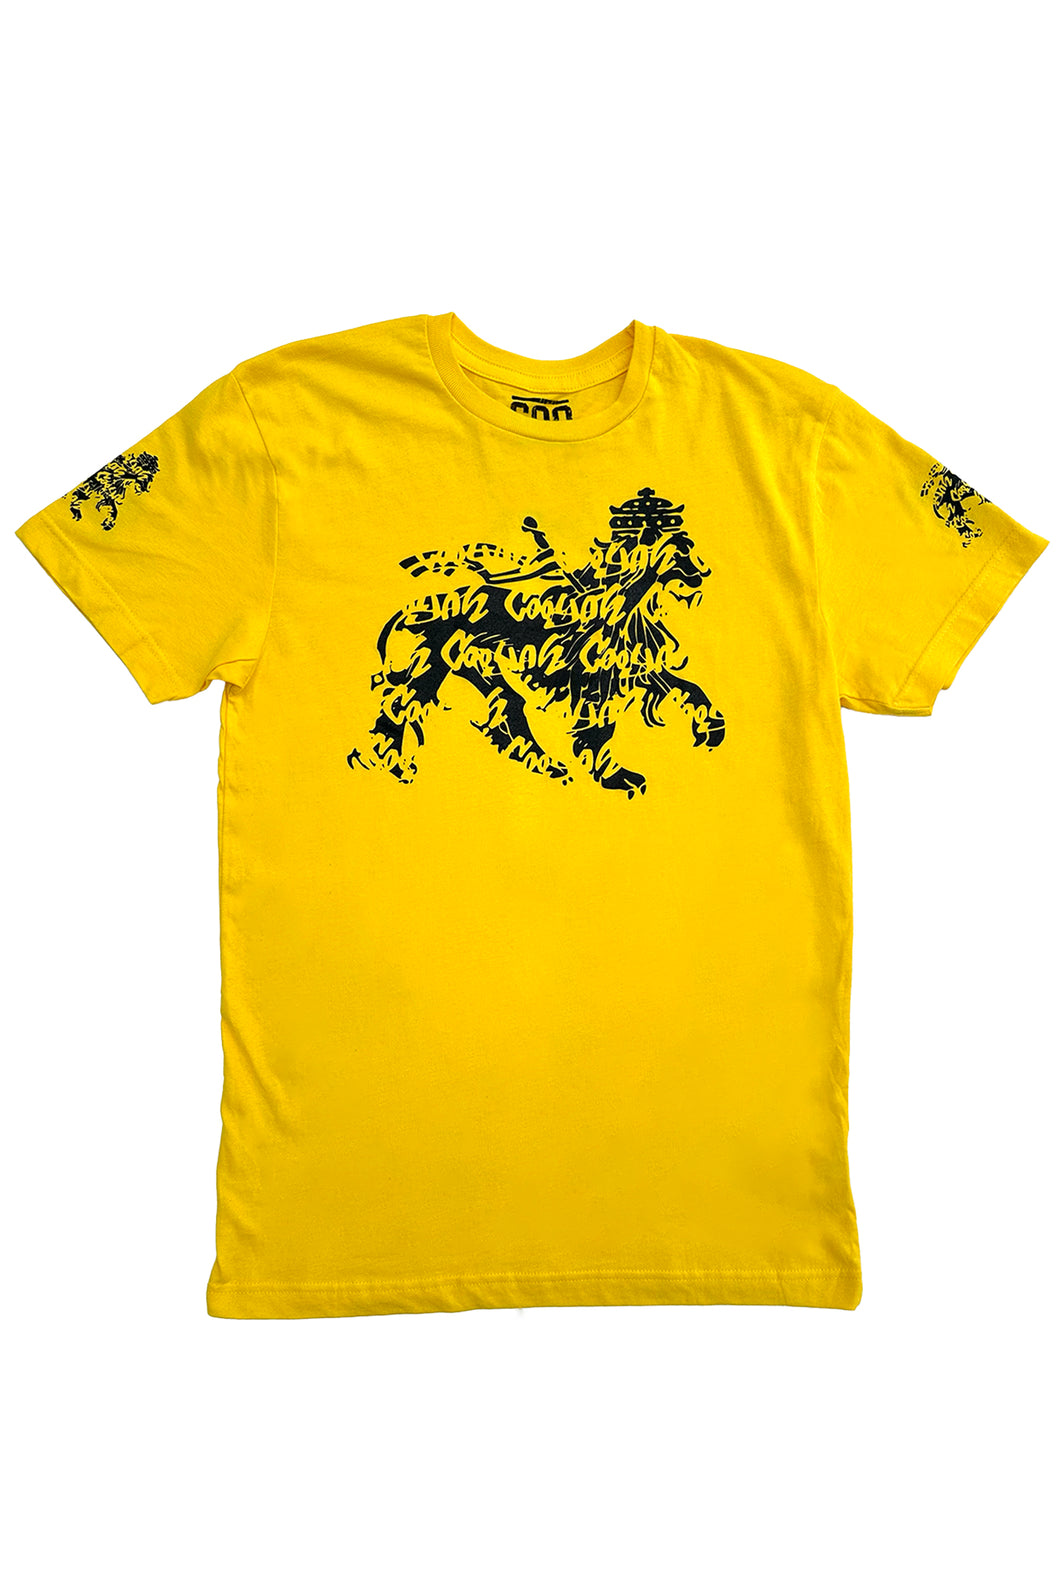 Cooyah. Men's yellow lion ringspun cotton graphic tee. We are the official reggae clothing brand established in 1987.